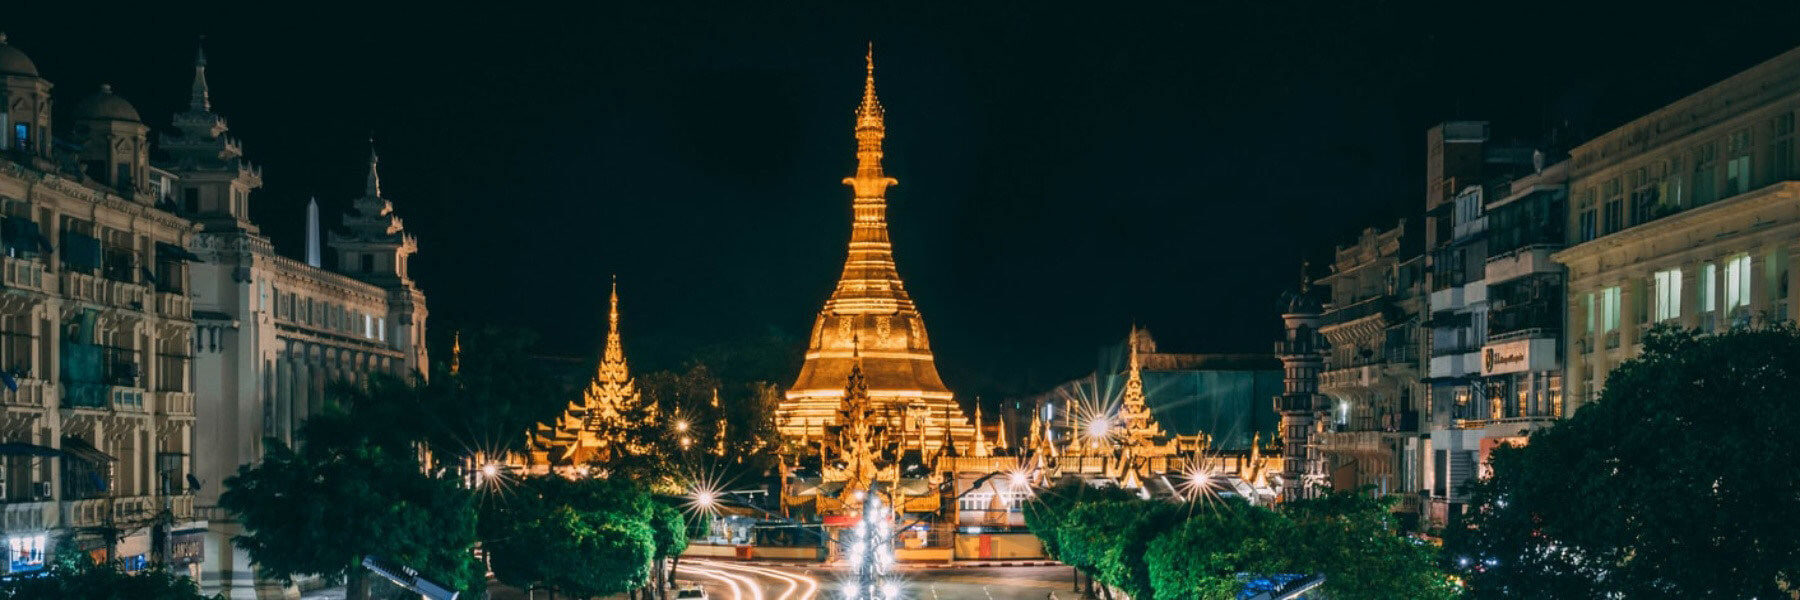 The Sule Pagoda is a Burmese stupa located in the heart of downtown Yangon